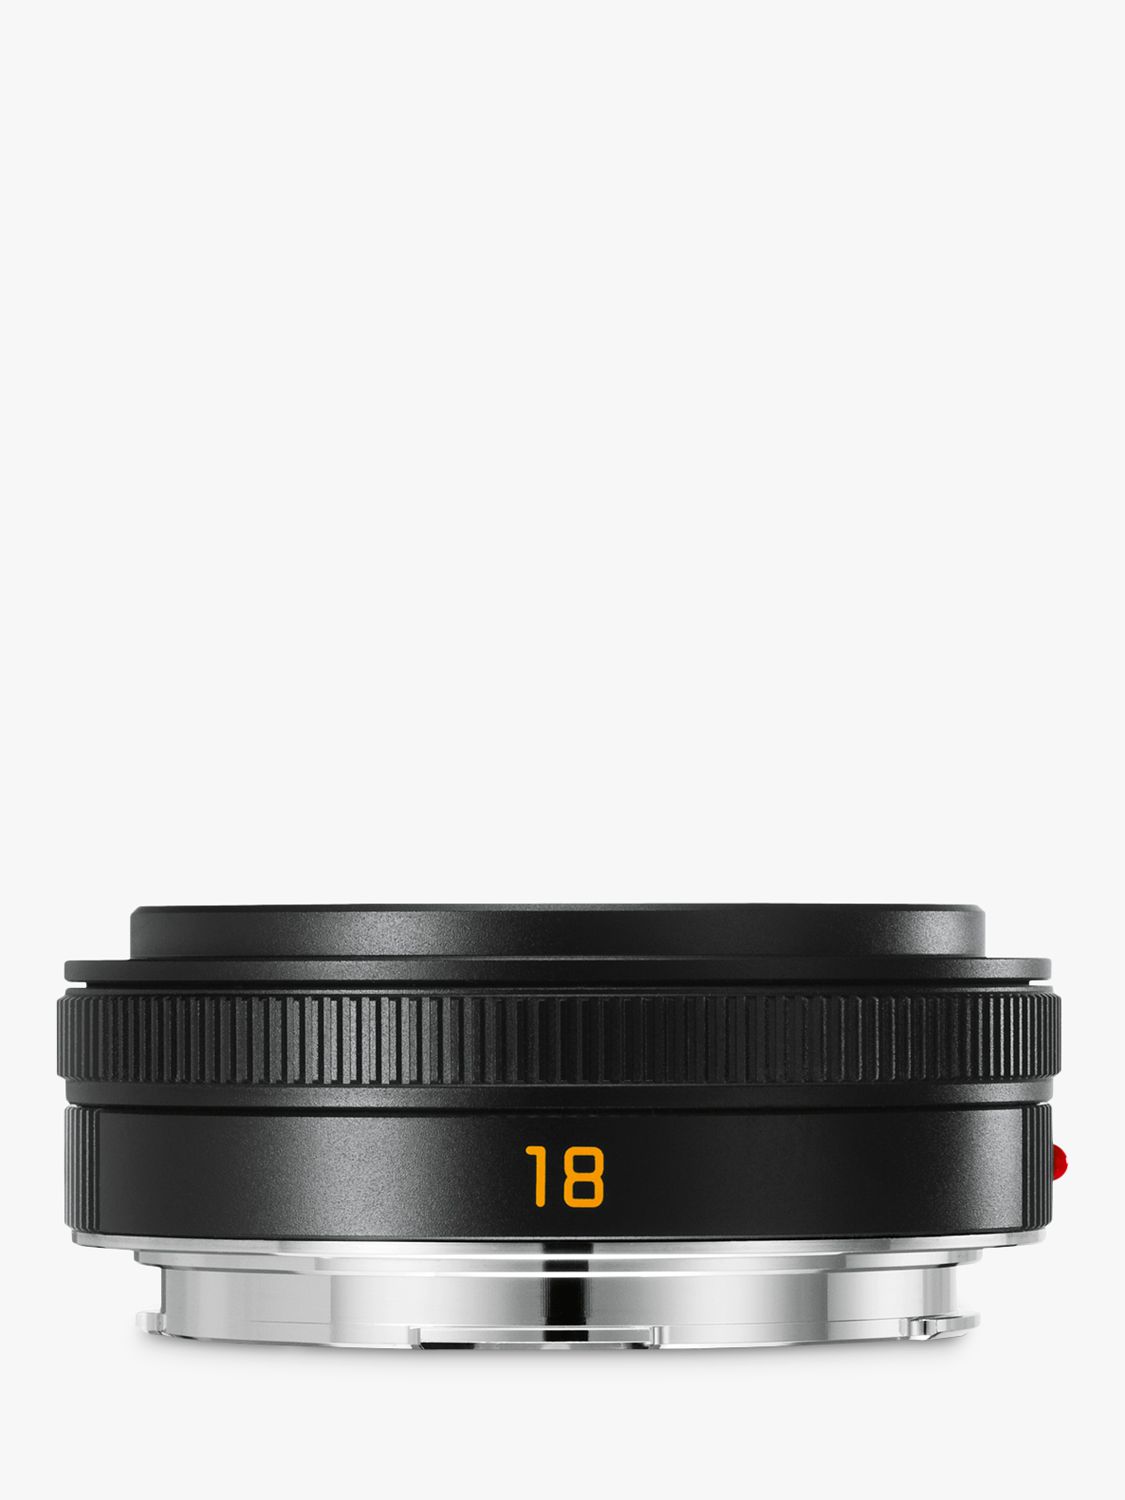 Image of Leica ElmaritTL 18mm f28 ASPH Wide Angle Lens